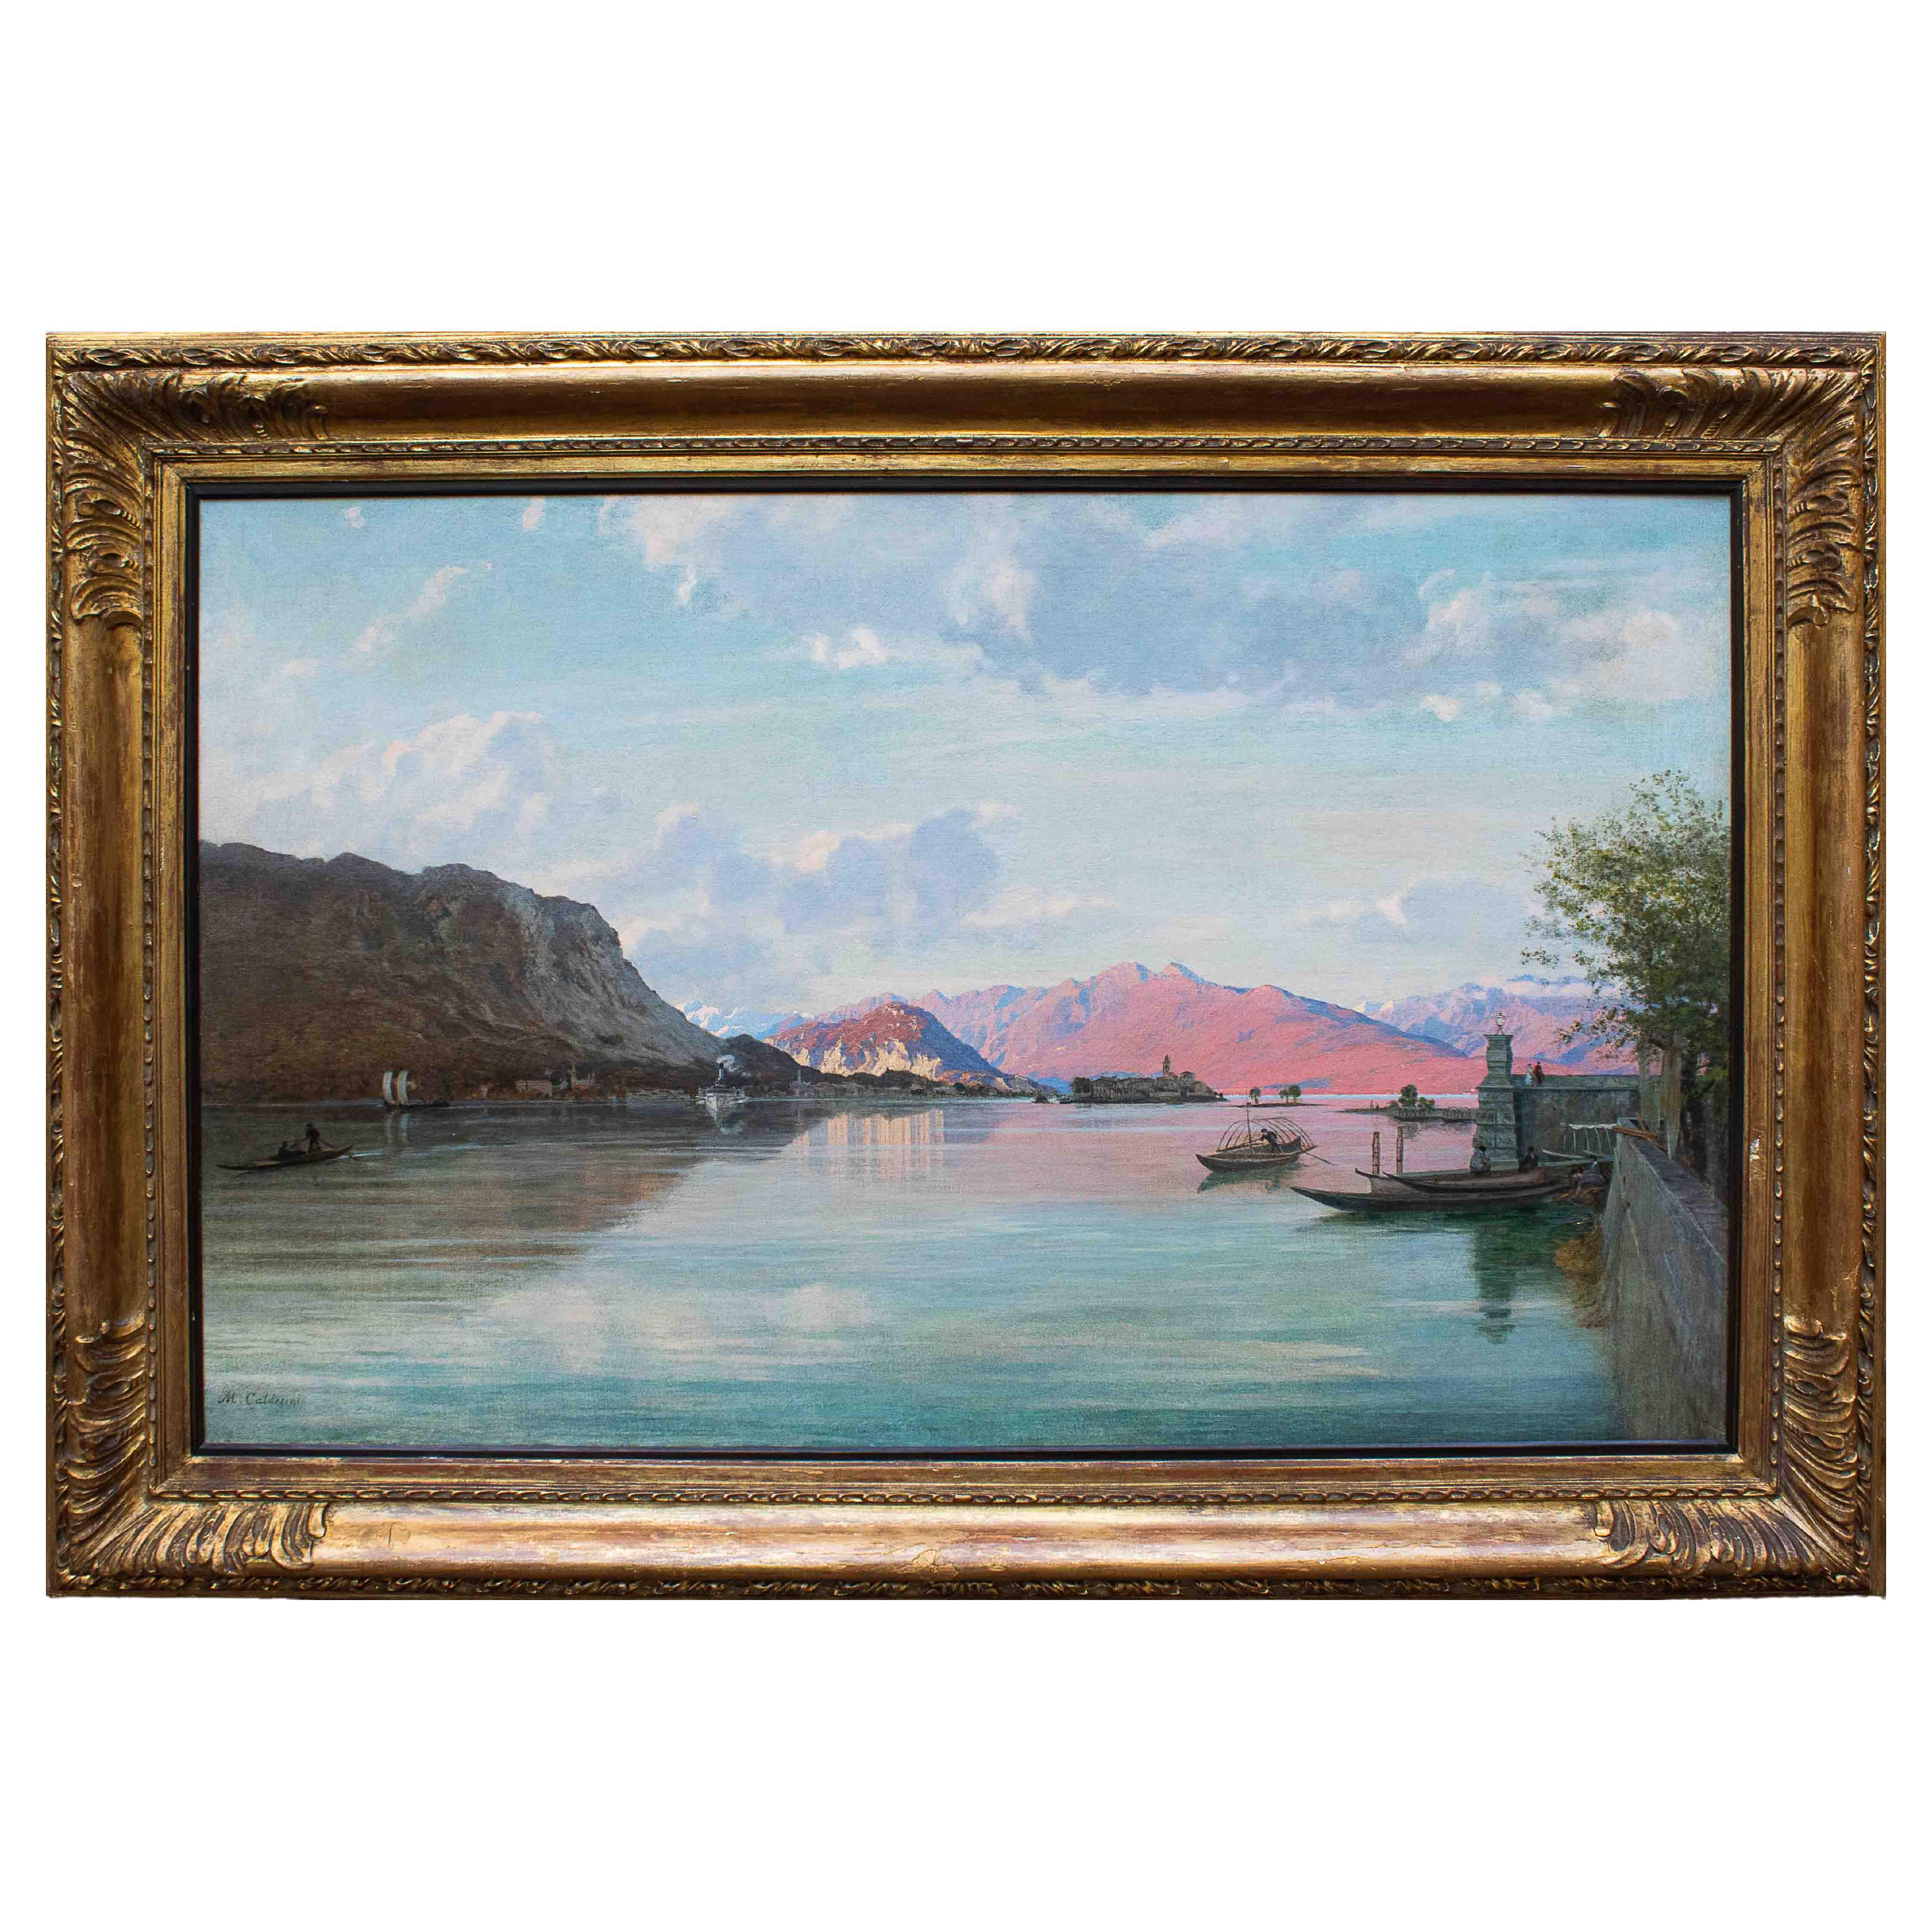 20th Century View of Lake Maggiore Painting Oil on Canvas by Calderini